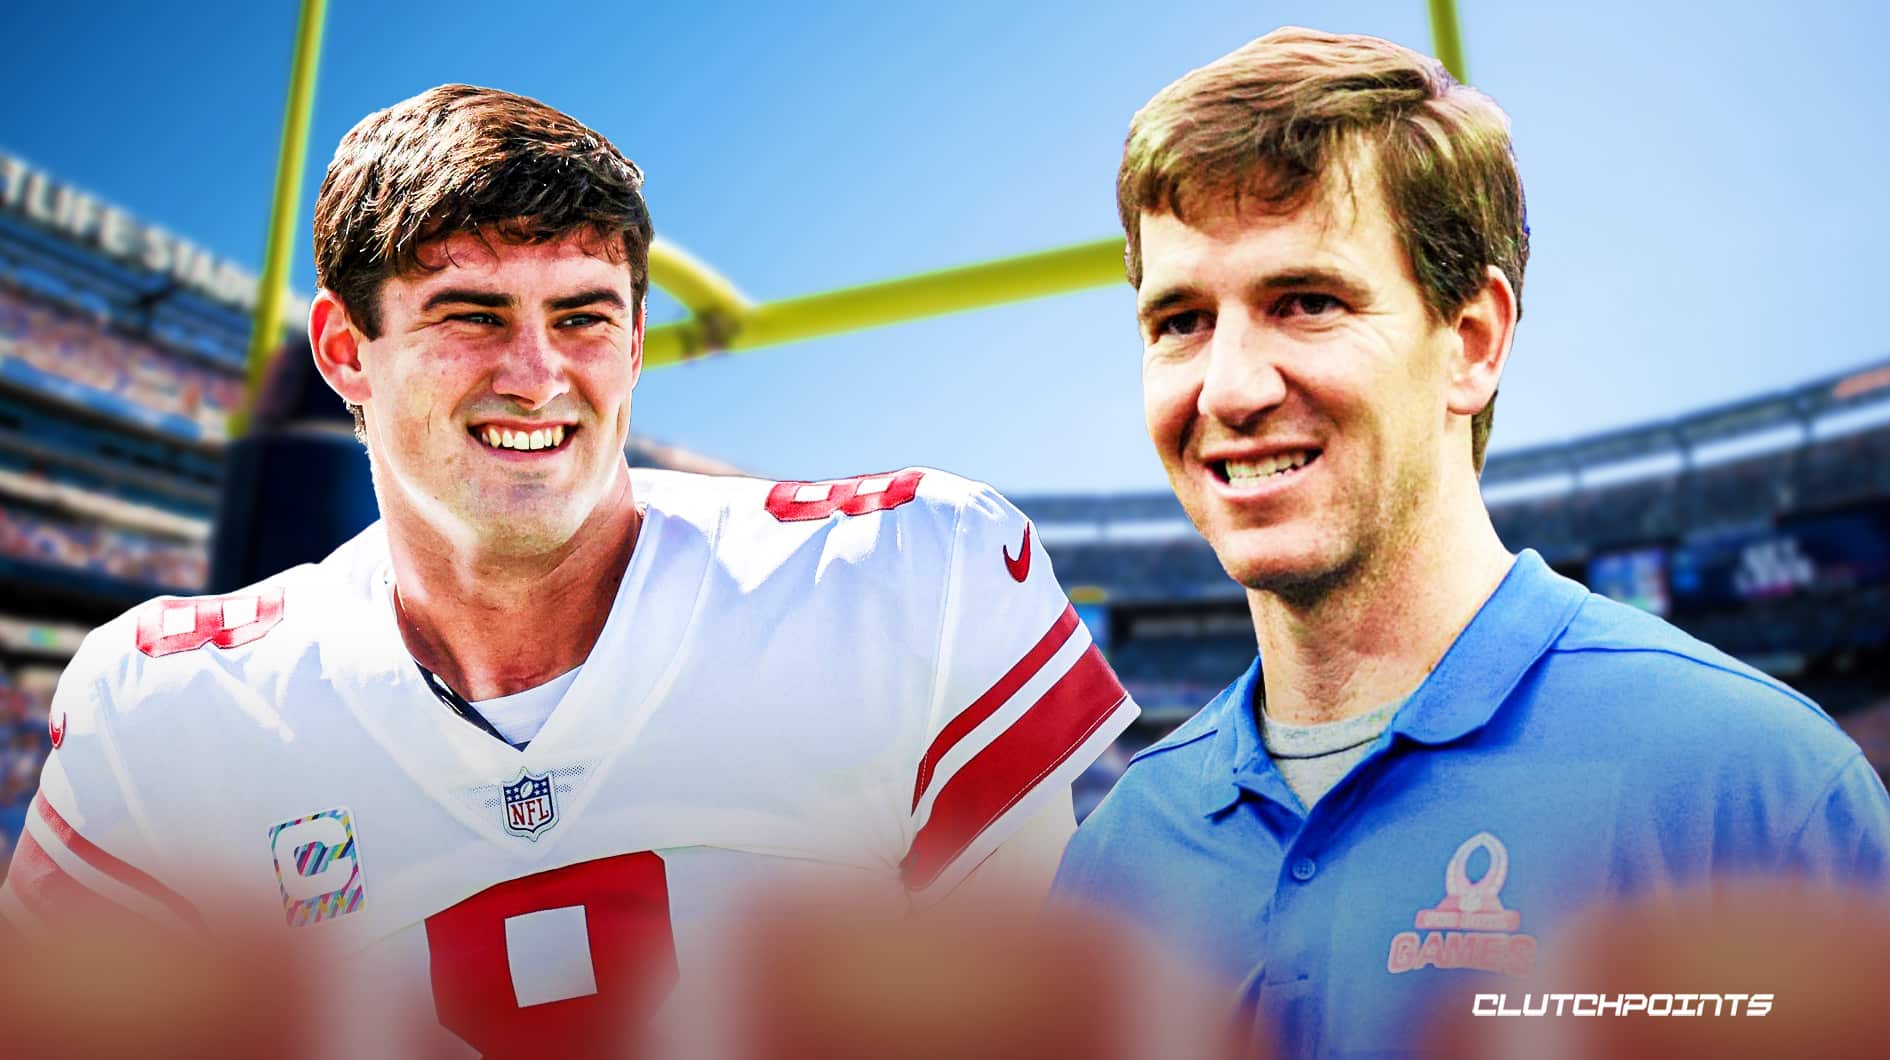 NFL Memes - Giants lose to the Cardinals tonight, but Eli with a